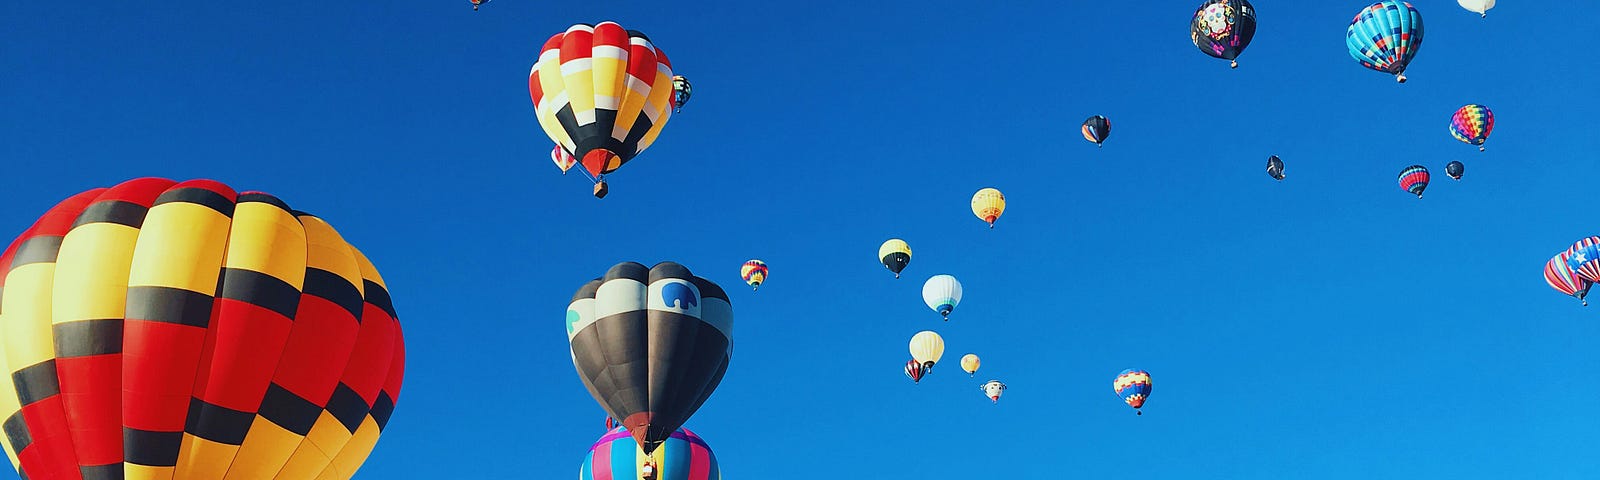 A beautiful blue sky filled with dozens of colorful hot air baloons in flight.